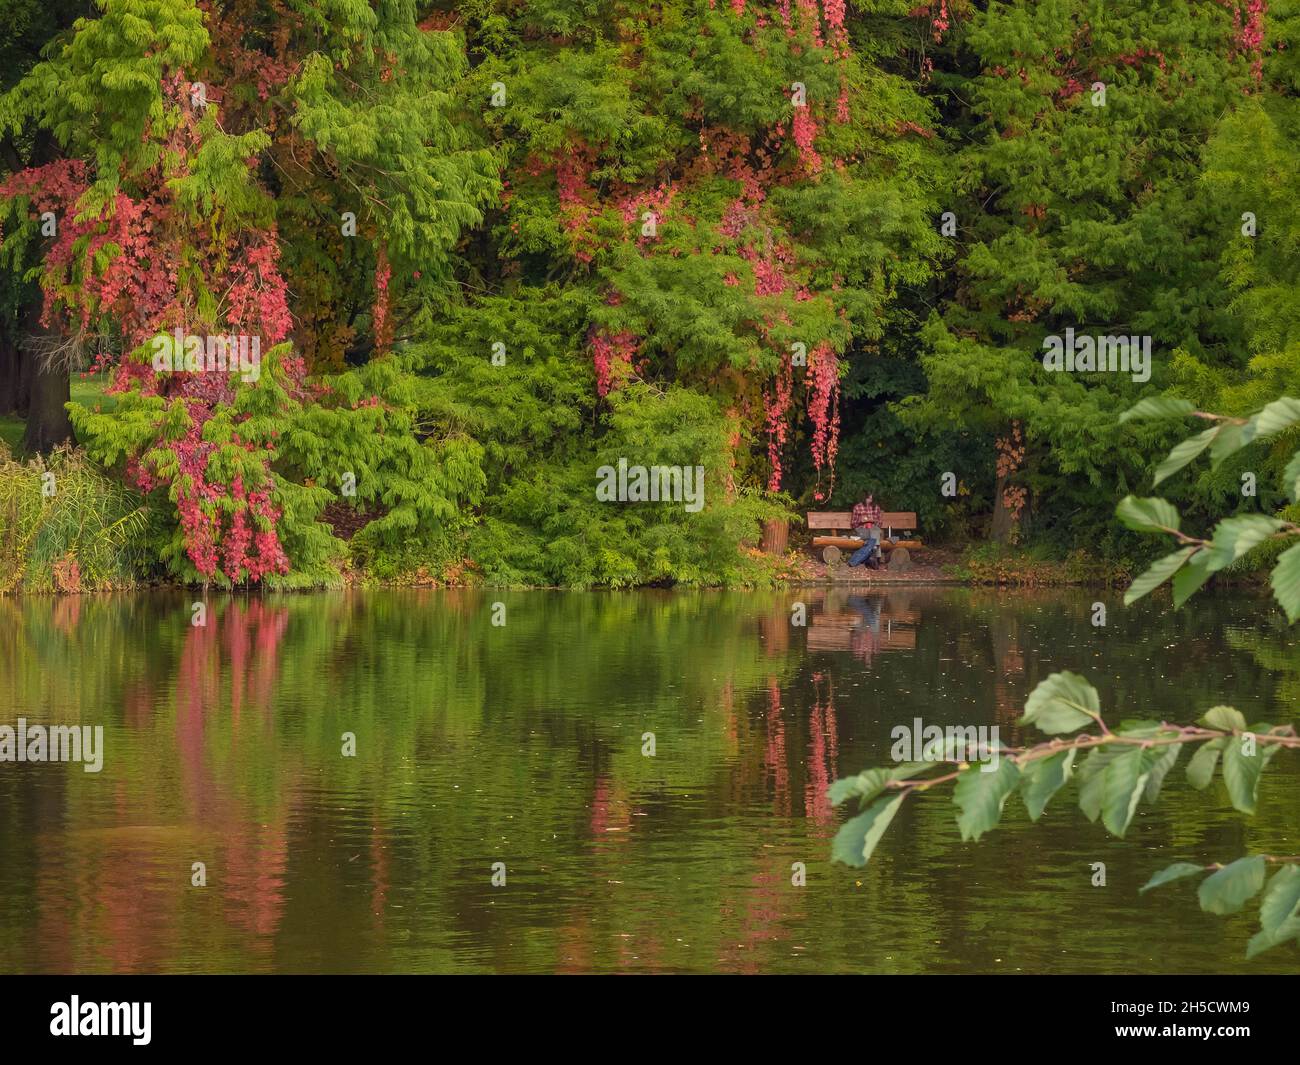 Pond Cypress, Pond Baldcypress (Taxodium ascendens, Taxodium distichum var. imbricatum), growing at a pond in Botanical garden, visitor on a bench, Stock Photo